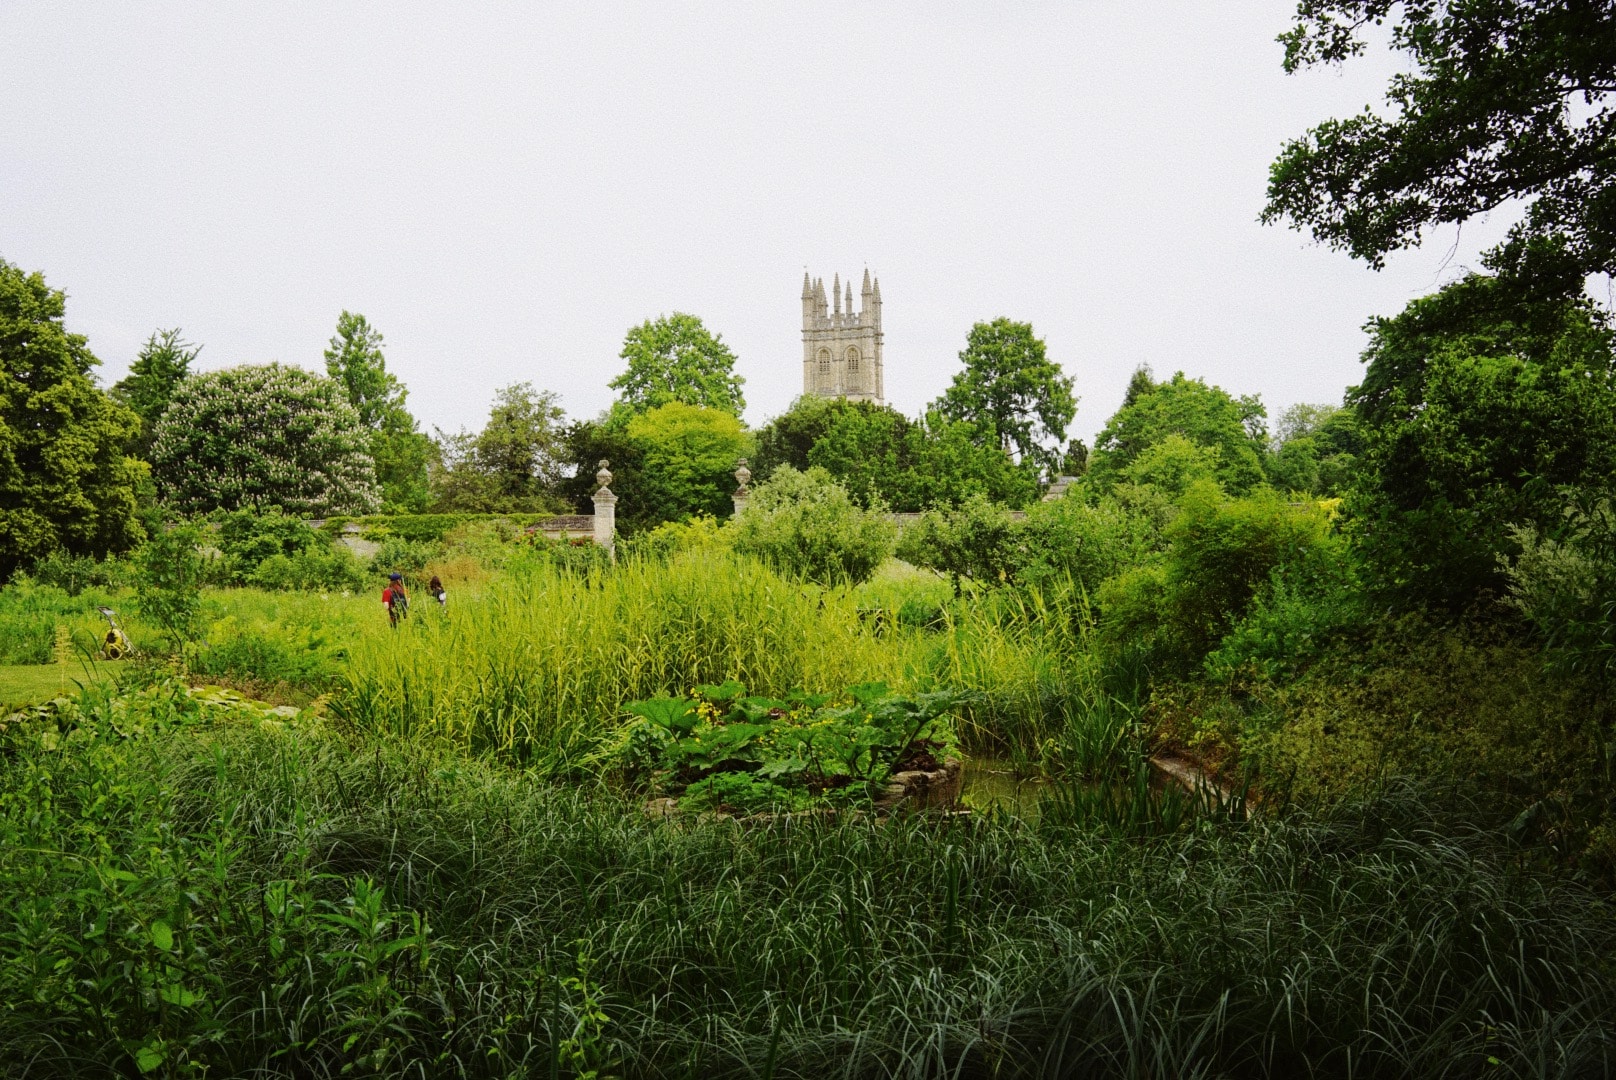 A church on the horizon with Oxford botanic garden in the foreground